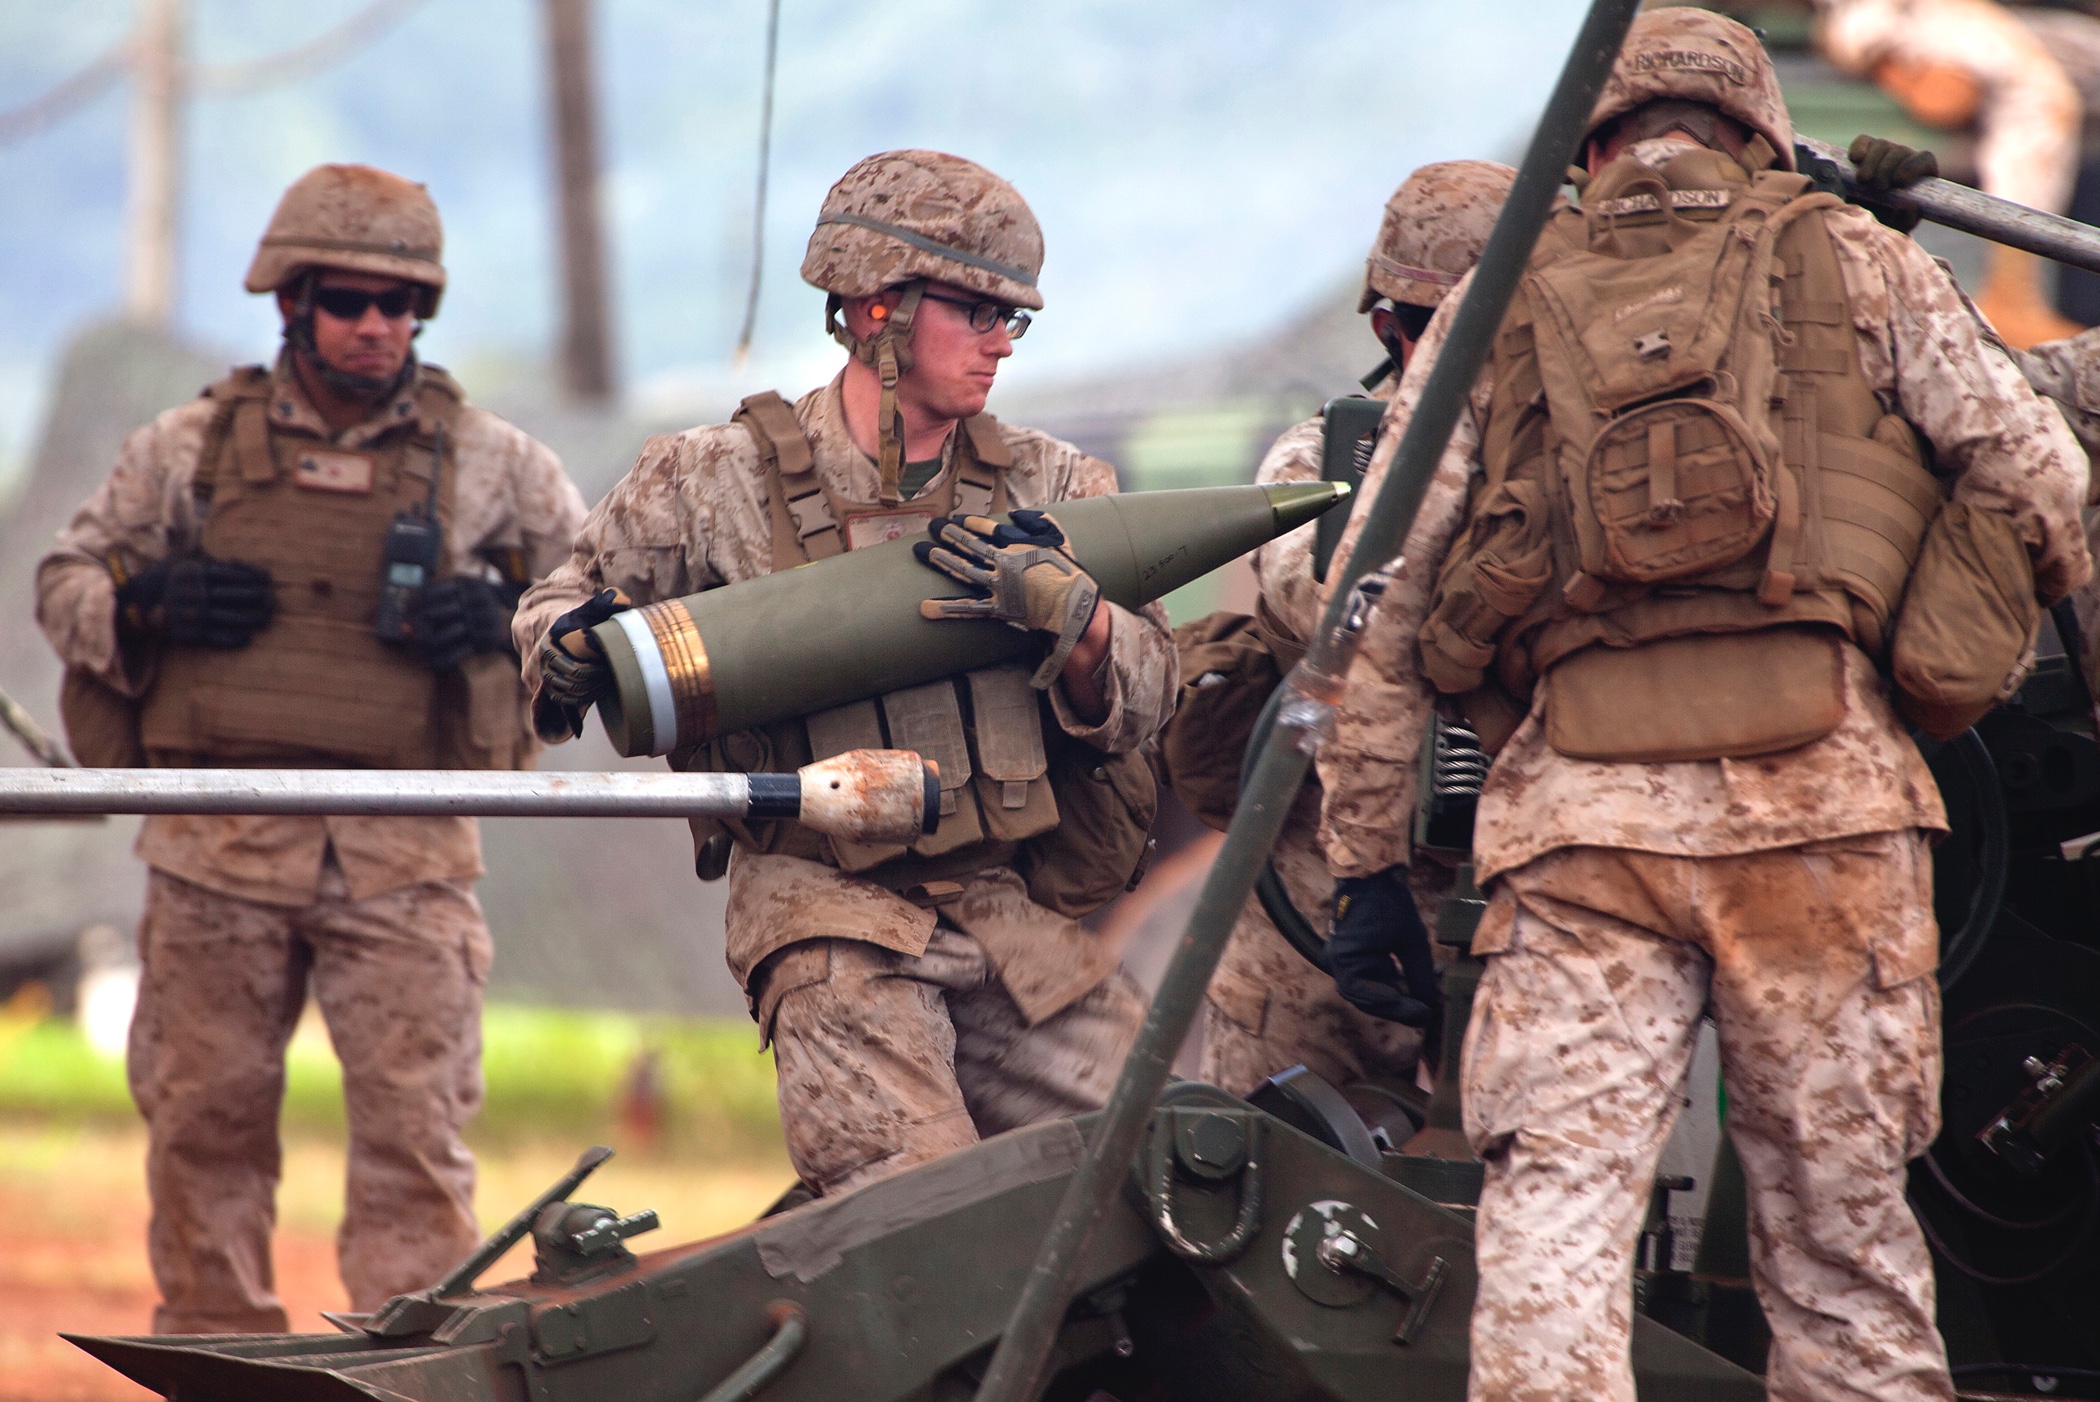 Lance Cpl. Jake Balcom, a cannoneer with Alpha Battery, 1st Battalion, 12th Marine Regiment, prepares to load a 155 mm artillery shell into an M777 howitzer in response to receiving a fire mission during a tree day training exercise at Schofield Barracks, June 11, 2013